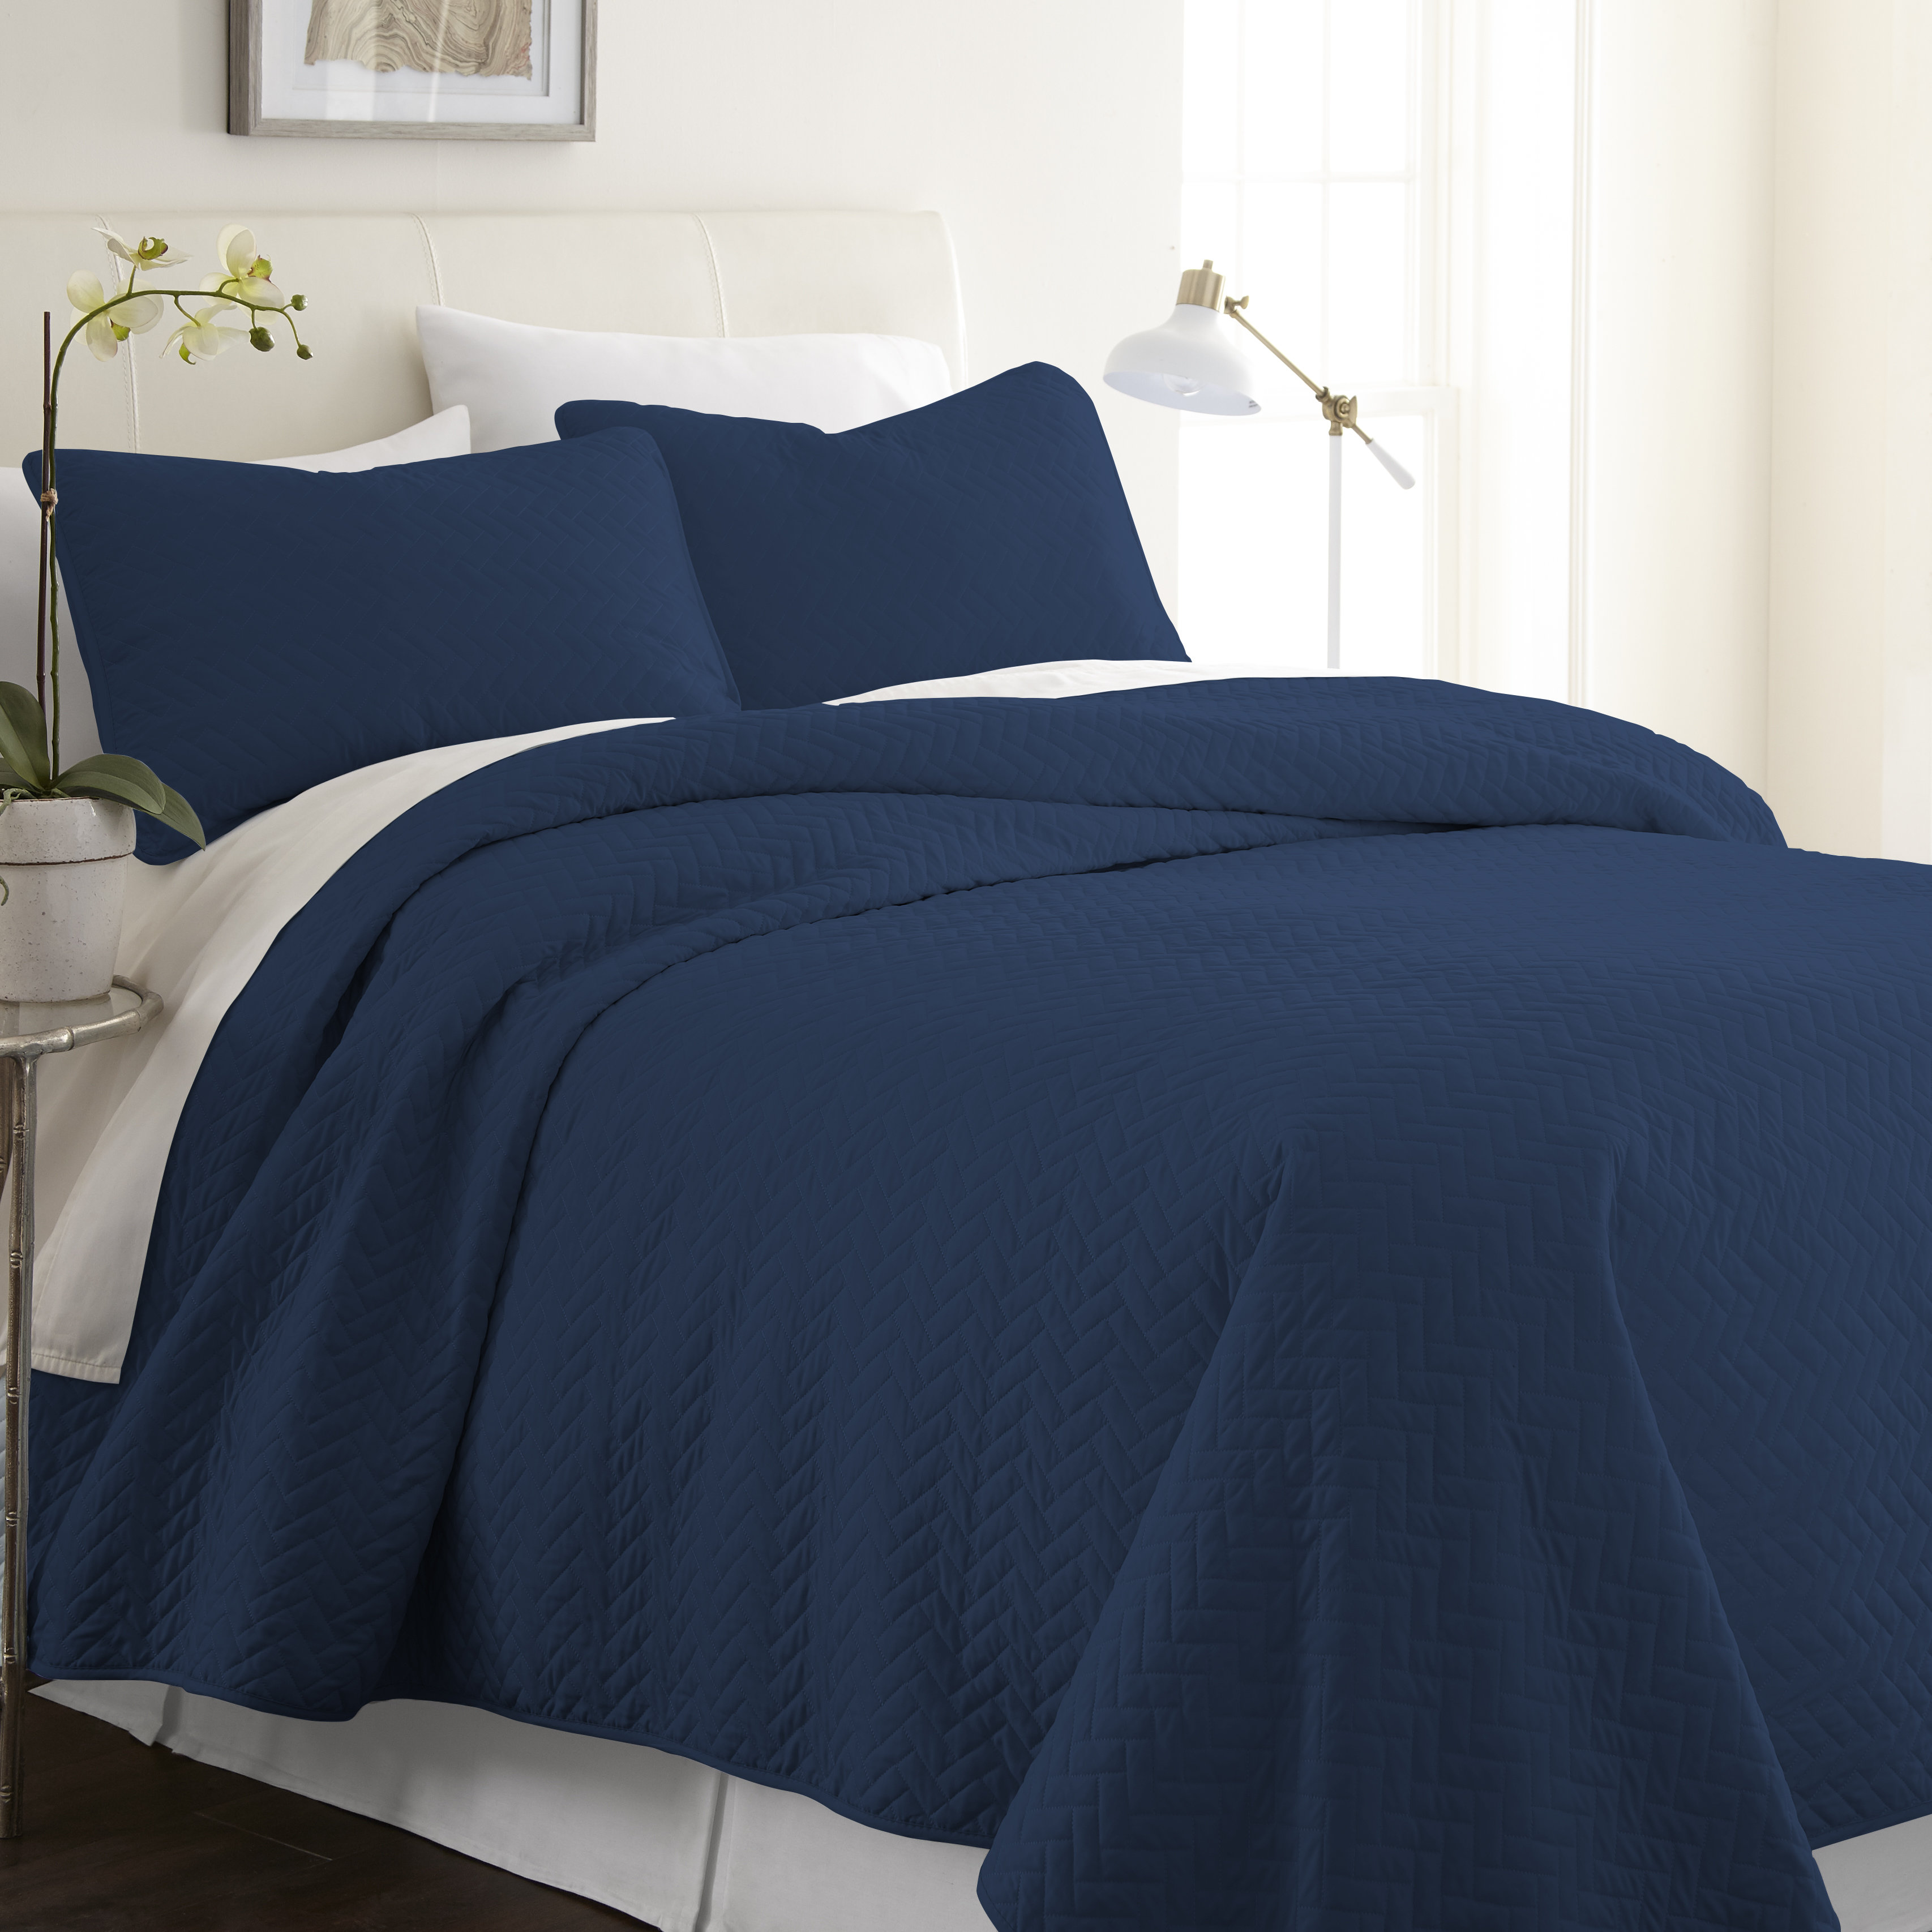 solid navy quilt